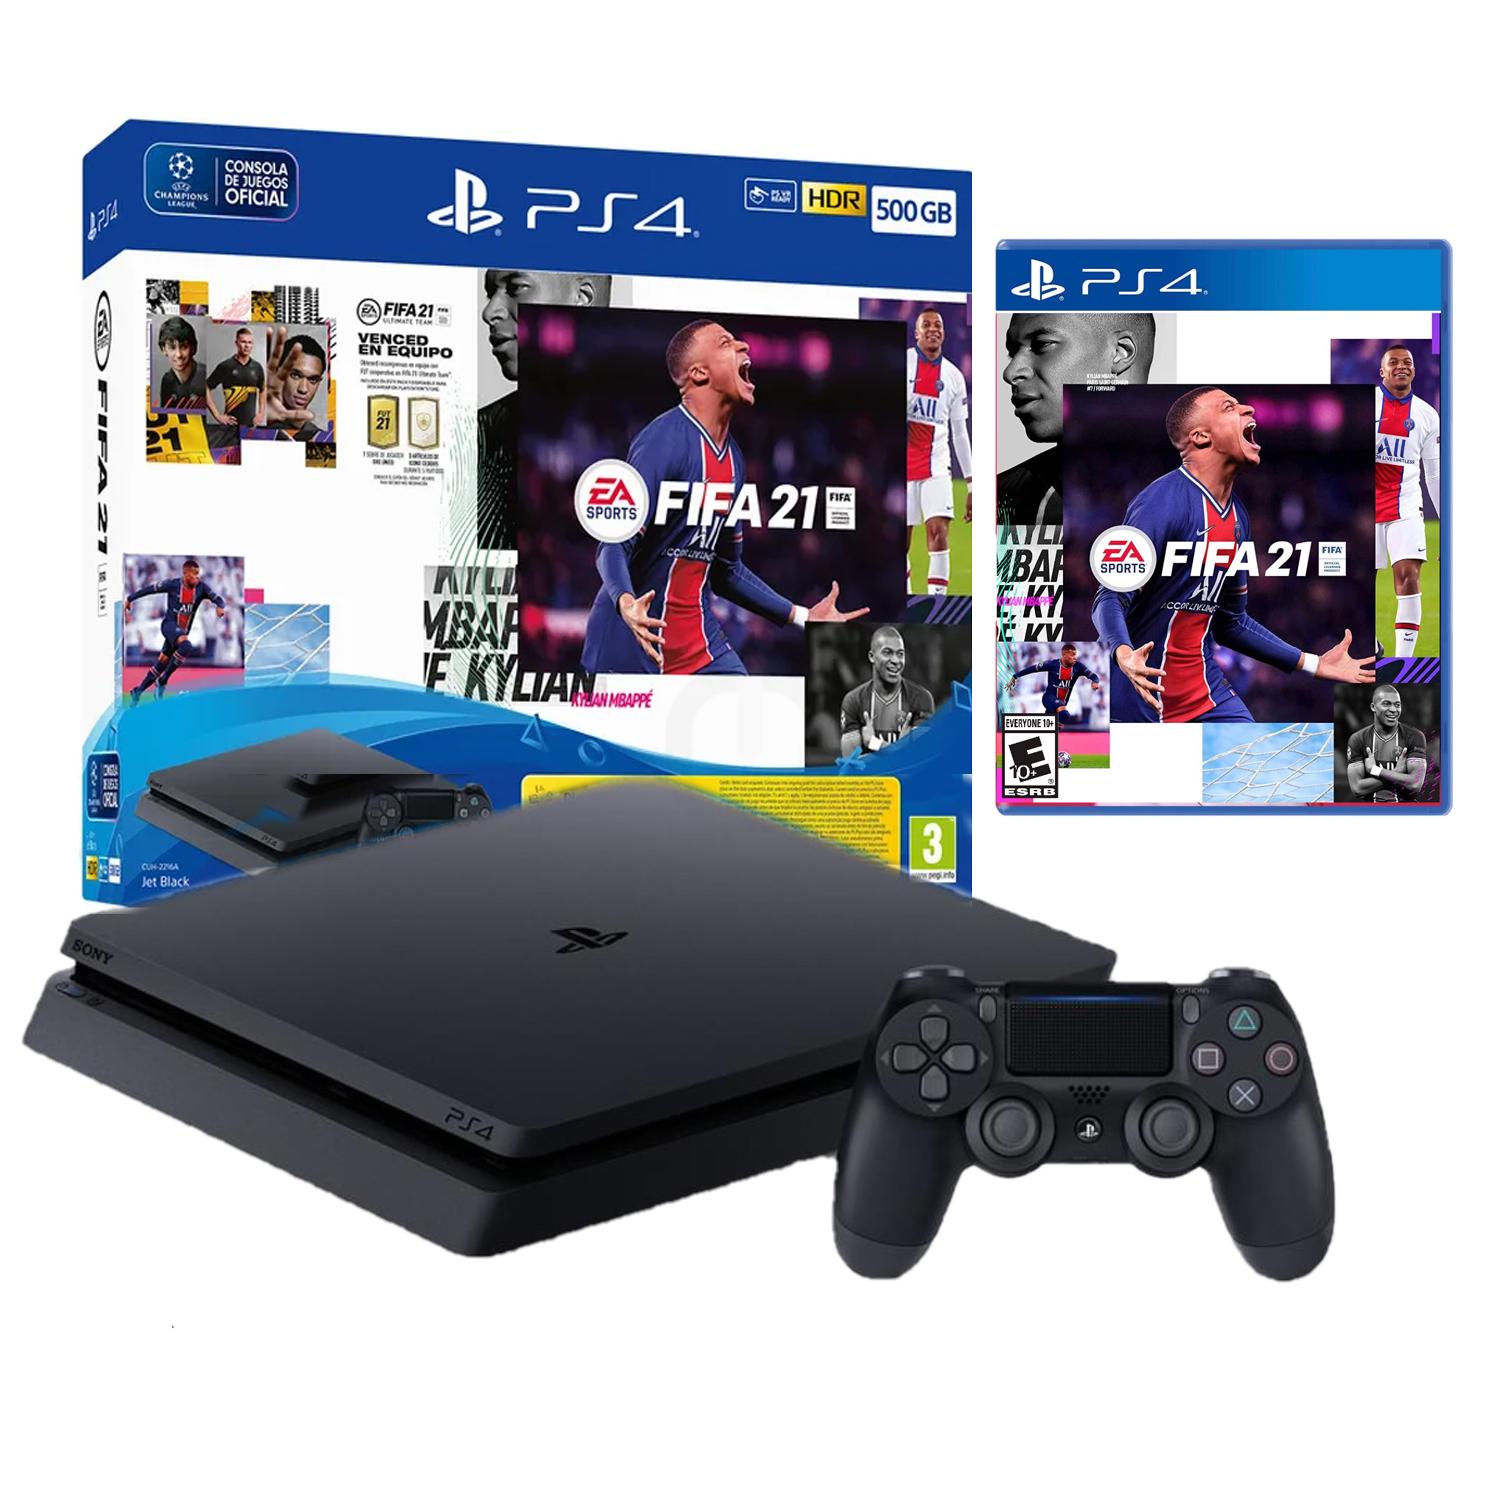 PS4 pack fifa 21/500GB/HDR Jet Black